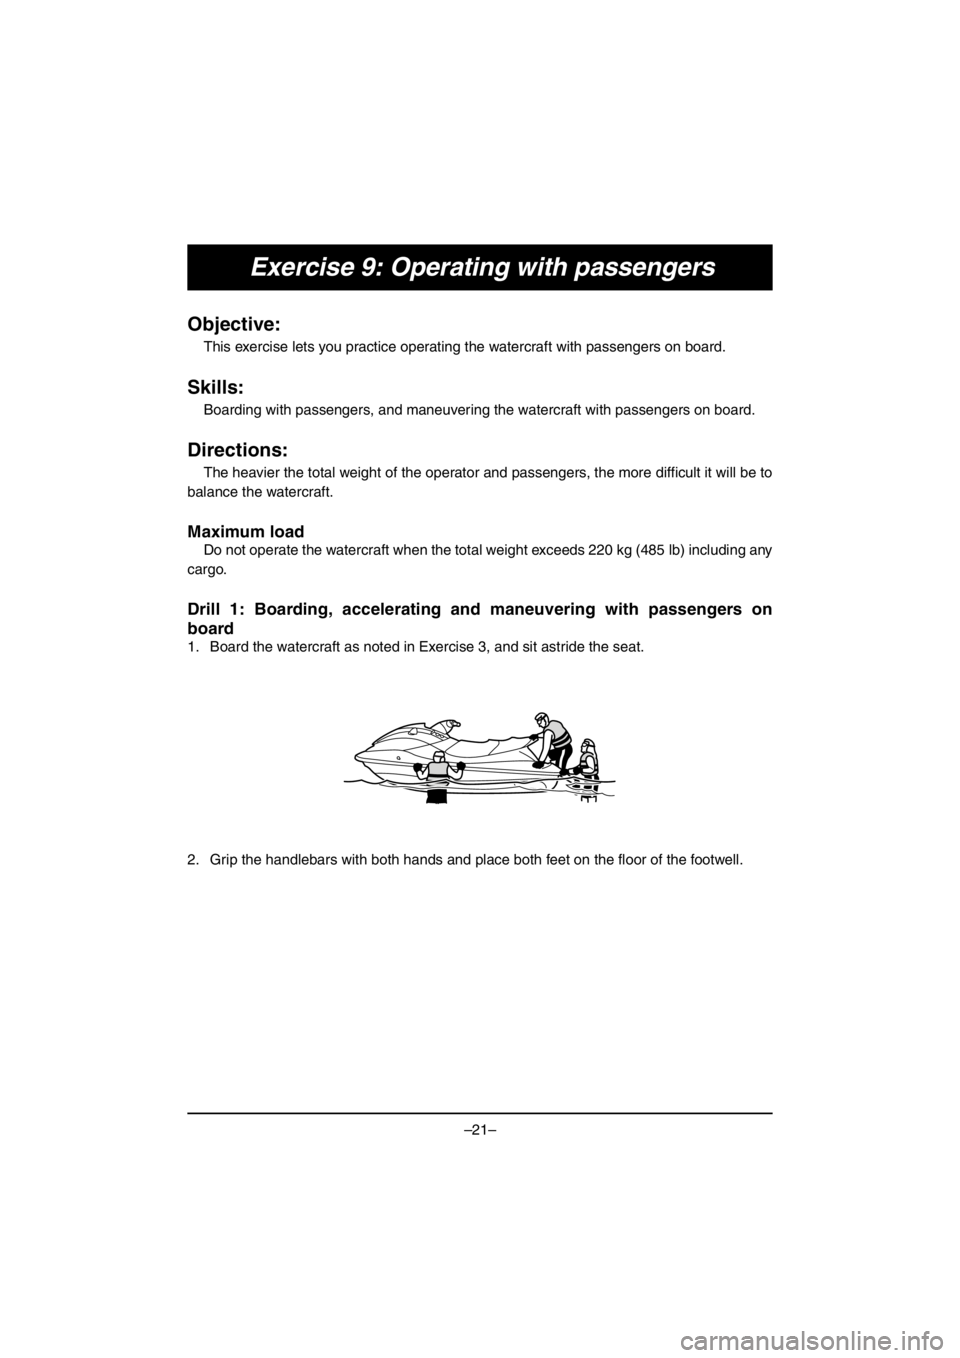 YAMAHA EX SPORT 2017  ΟΔΗΓΌΣ ΧΡΉΣΗΣ (in Greek) –21–
Exercise 9: Operating with passengers
Objective:
This exercise lets you practice operating the watercraft with passengers on board.
Skills:
Boarding with passengers, and maneuvering the water